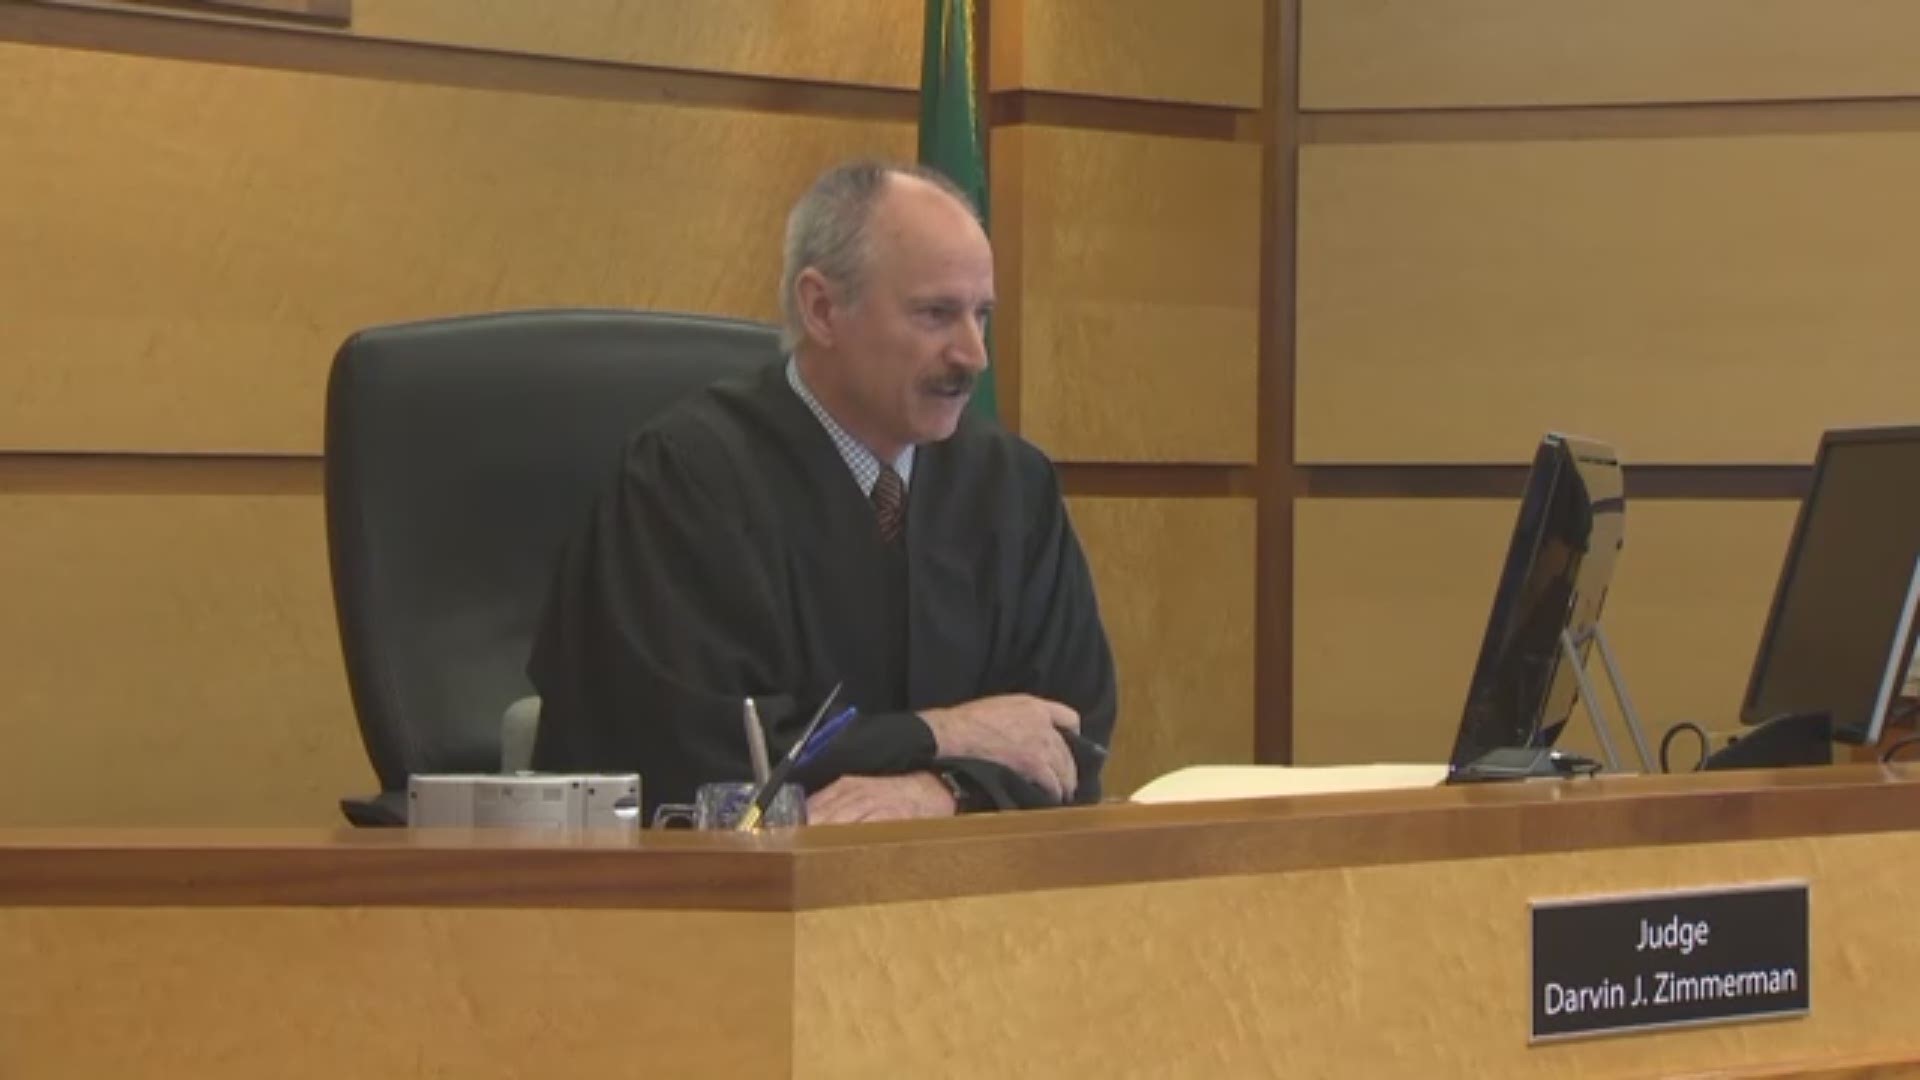 Taylor Smith was ordered to spend 2 days in jail, followed by 38 days of work crew detail, after pushing her friend Jordan Holgerson off of the Moulton Falls bridge in the Summer of 2018. Here's the full sentencing hearing. More: https://on.kgw.com/2U0VuGn